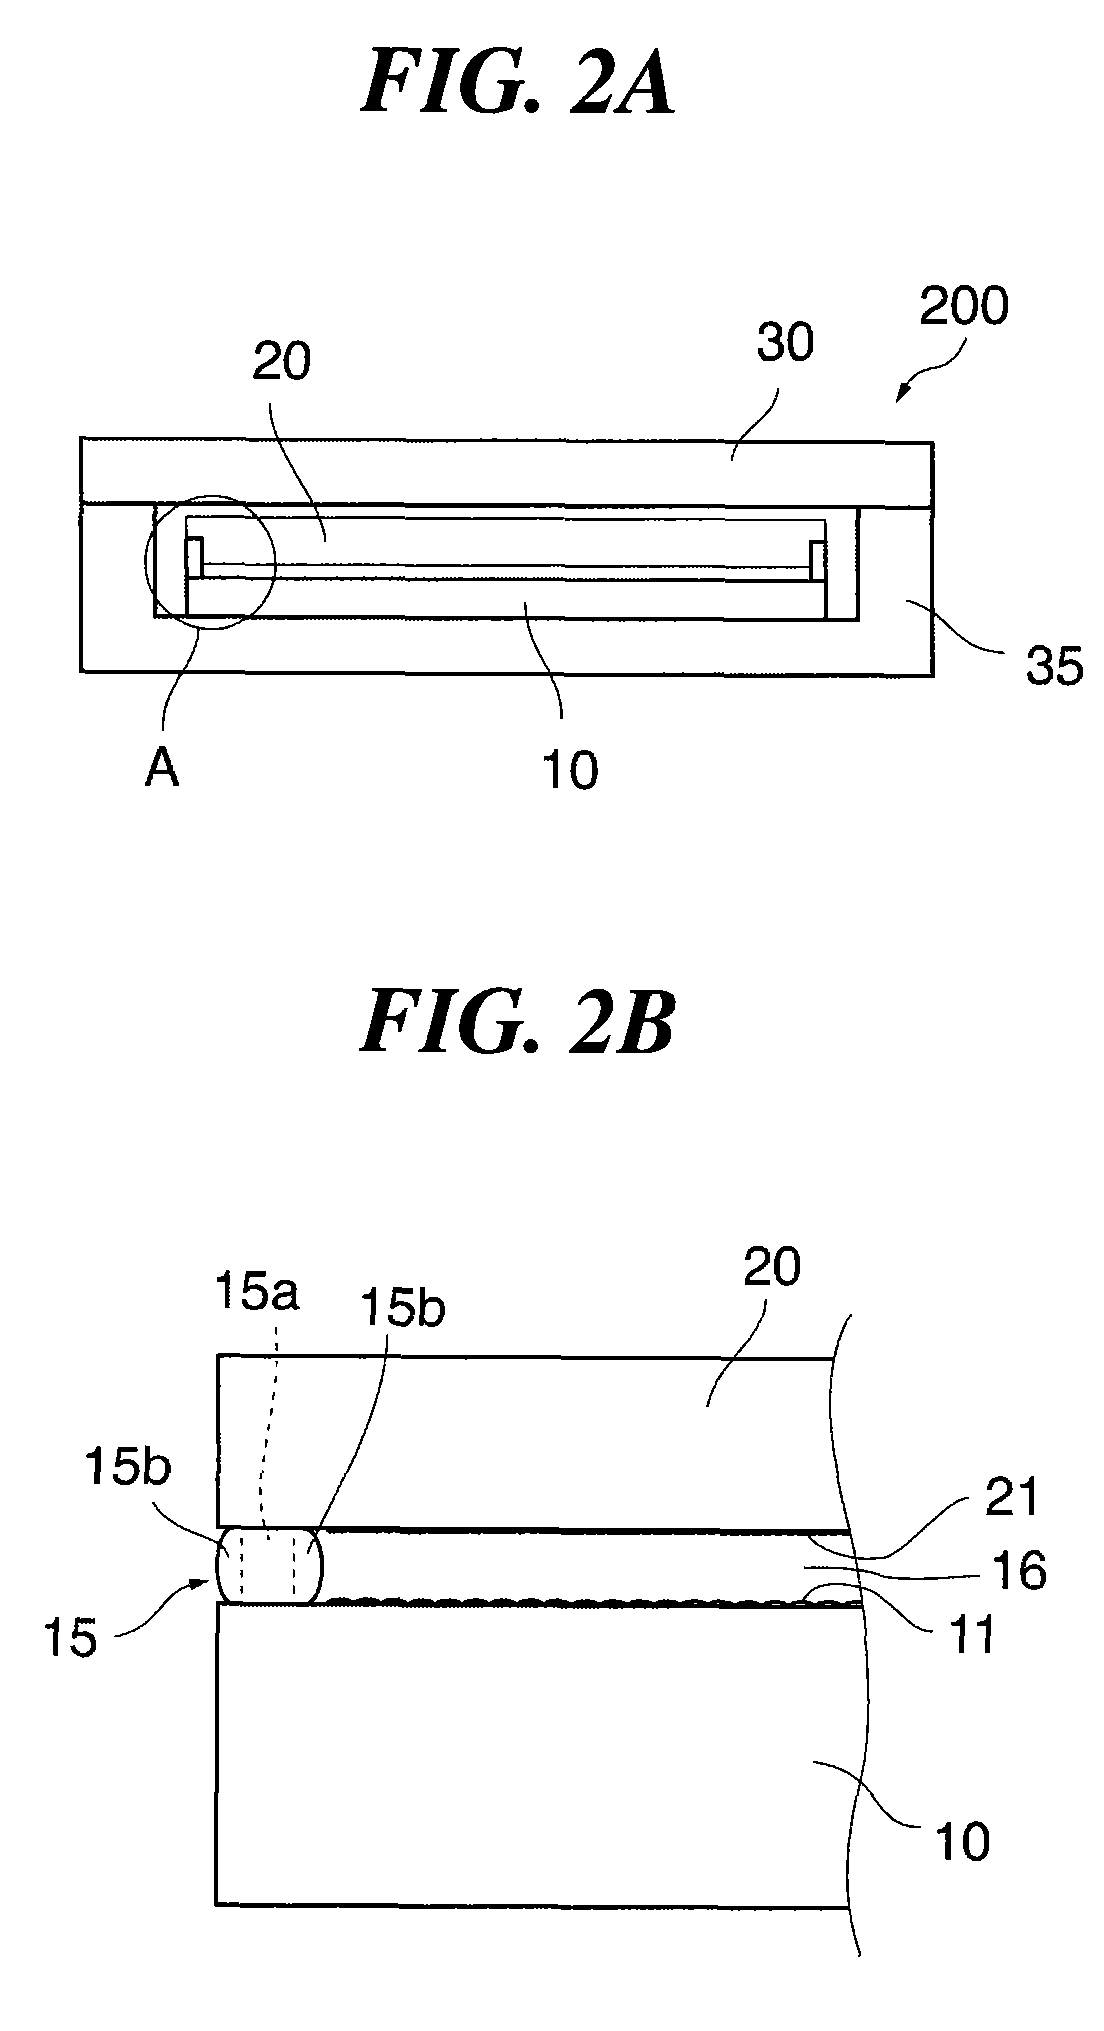 Image pickup element unit with an image pickup element on a substrate for picking up an image and an optical low pass filter spaced from the image pickup element